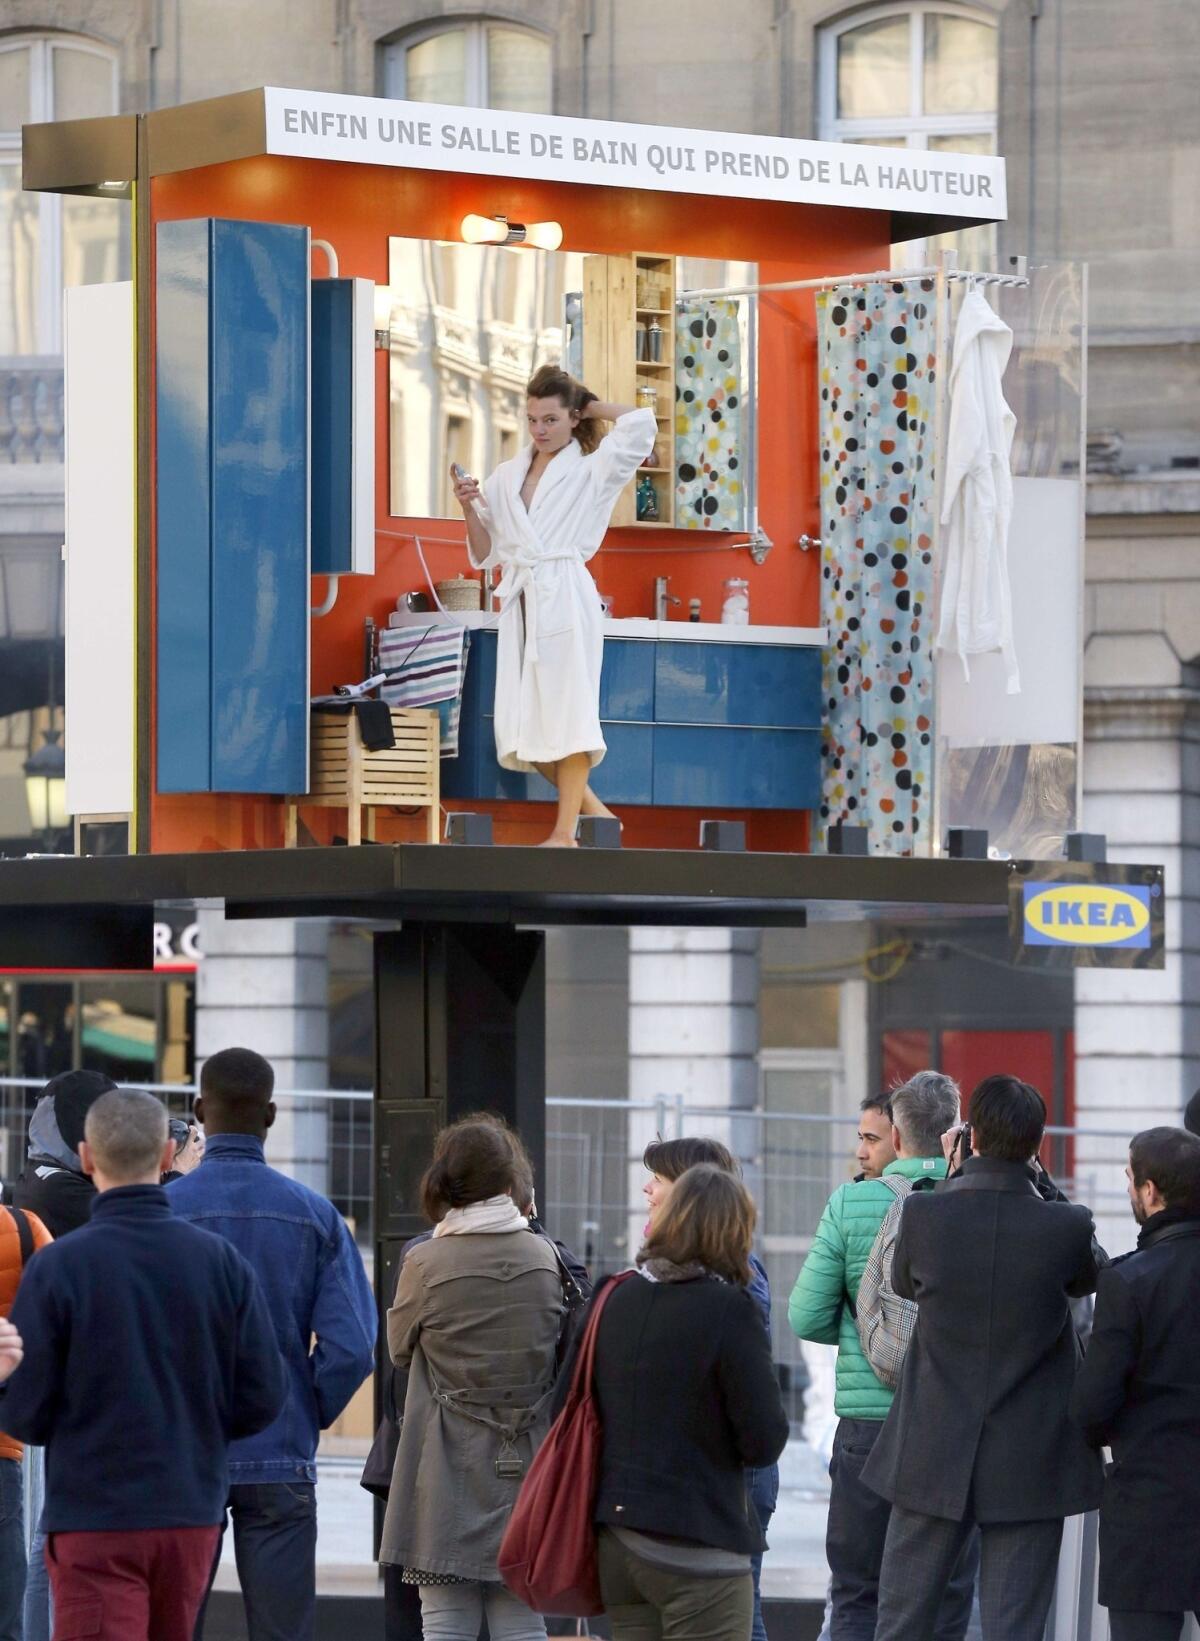 An actress is the star of a live Ikea billboard in front of a Paris train station.